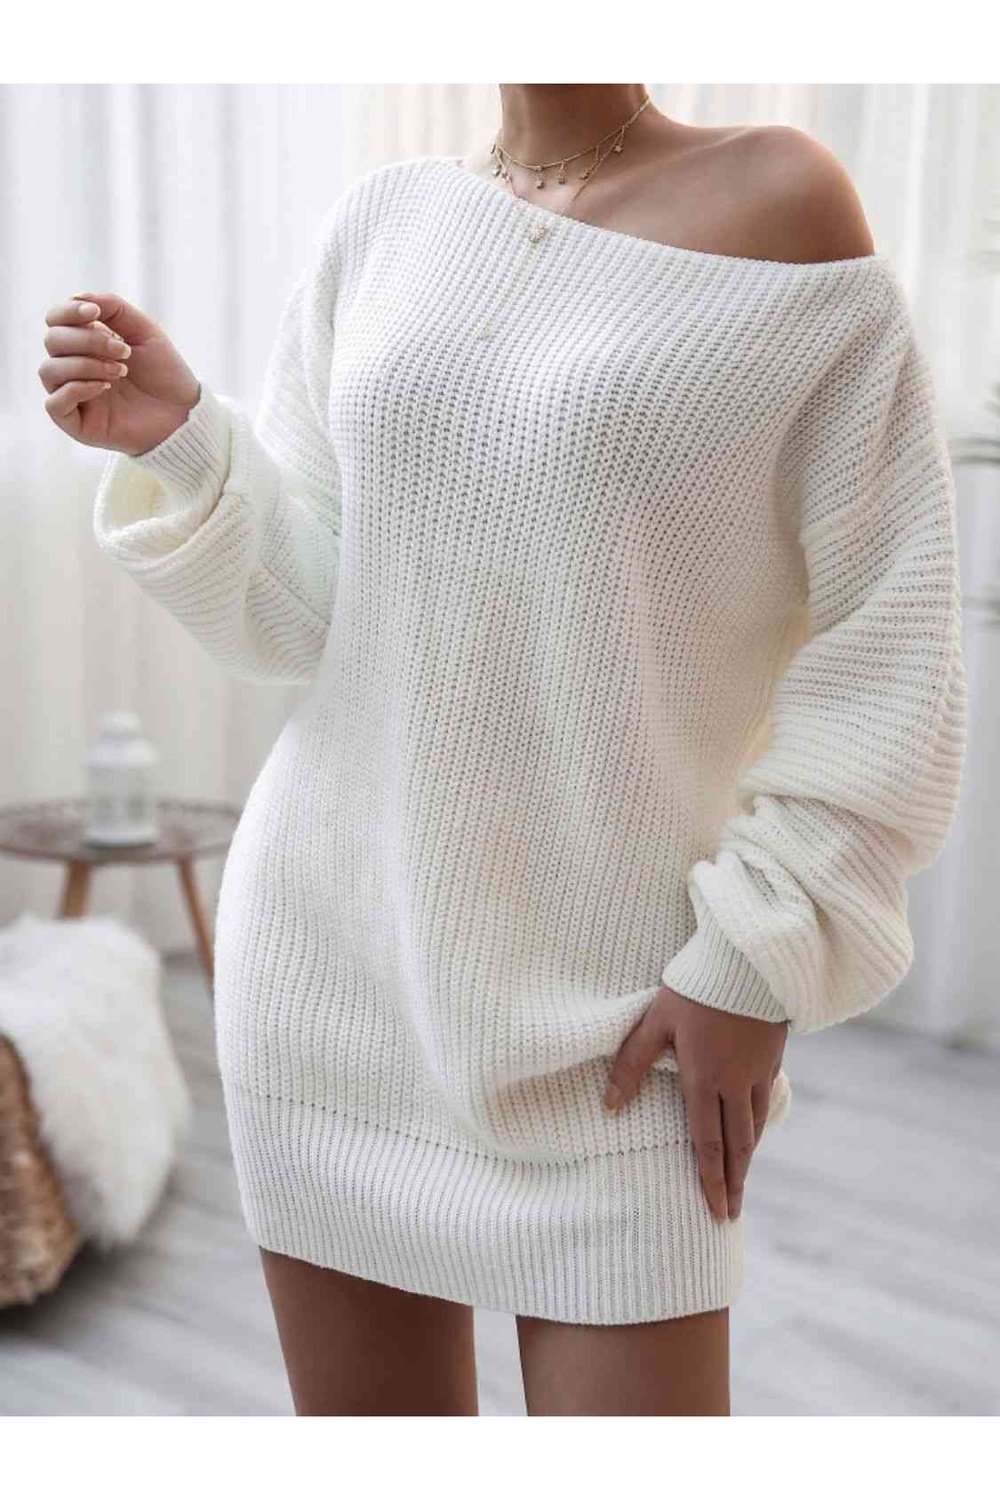 Rib-Knit Balloon Sleeve Boat Neck Sweater Dress - Sweater Dresses - FITGGINS